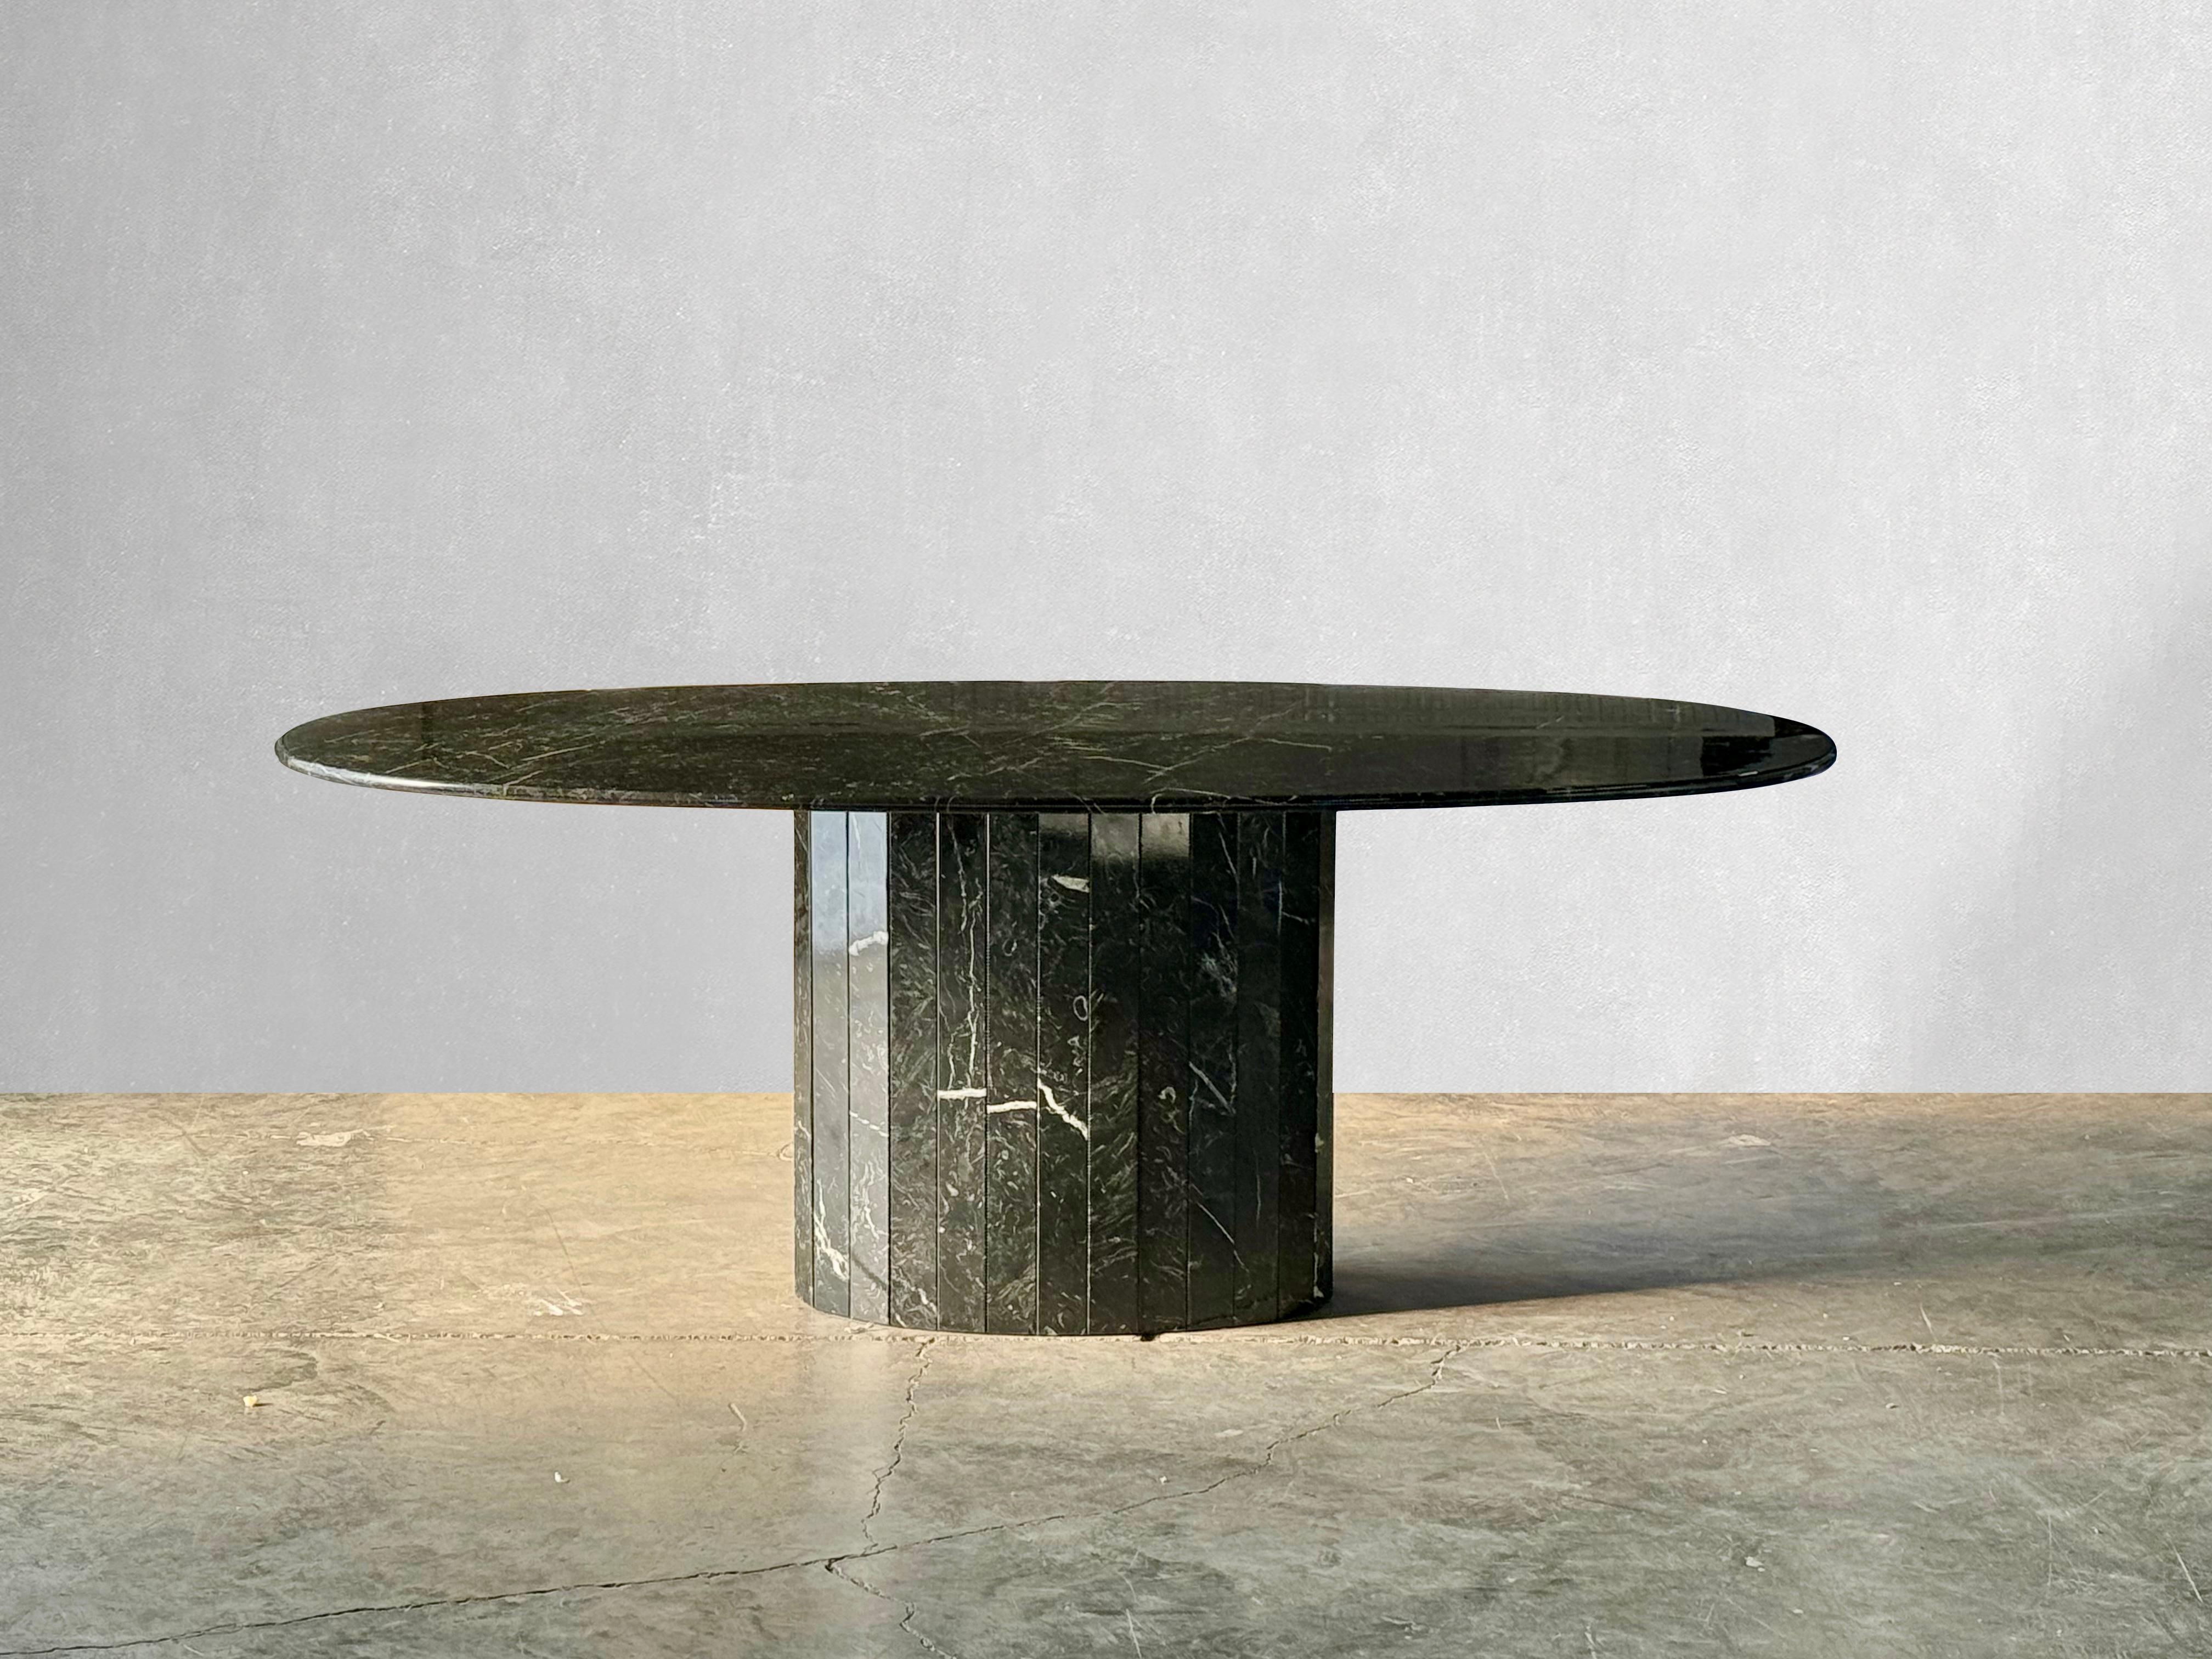 Striking Vintage Oval Dining Table in Nero Marquina Marble. 

Nero Marquina is high quality stone that originates from the Basque Country North of Spain. This specific table has beautiful milky white veining throughout and fluted slatted base. 